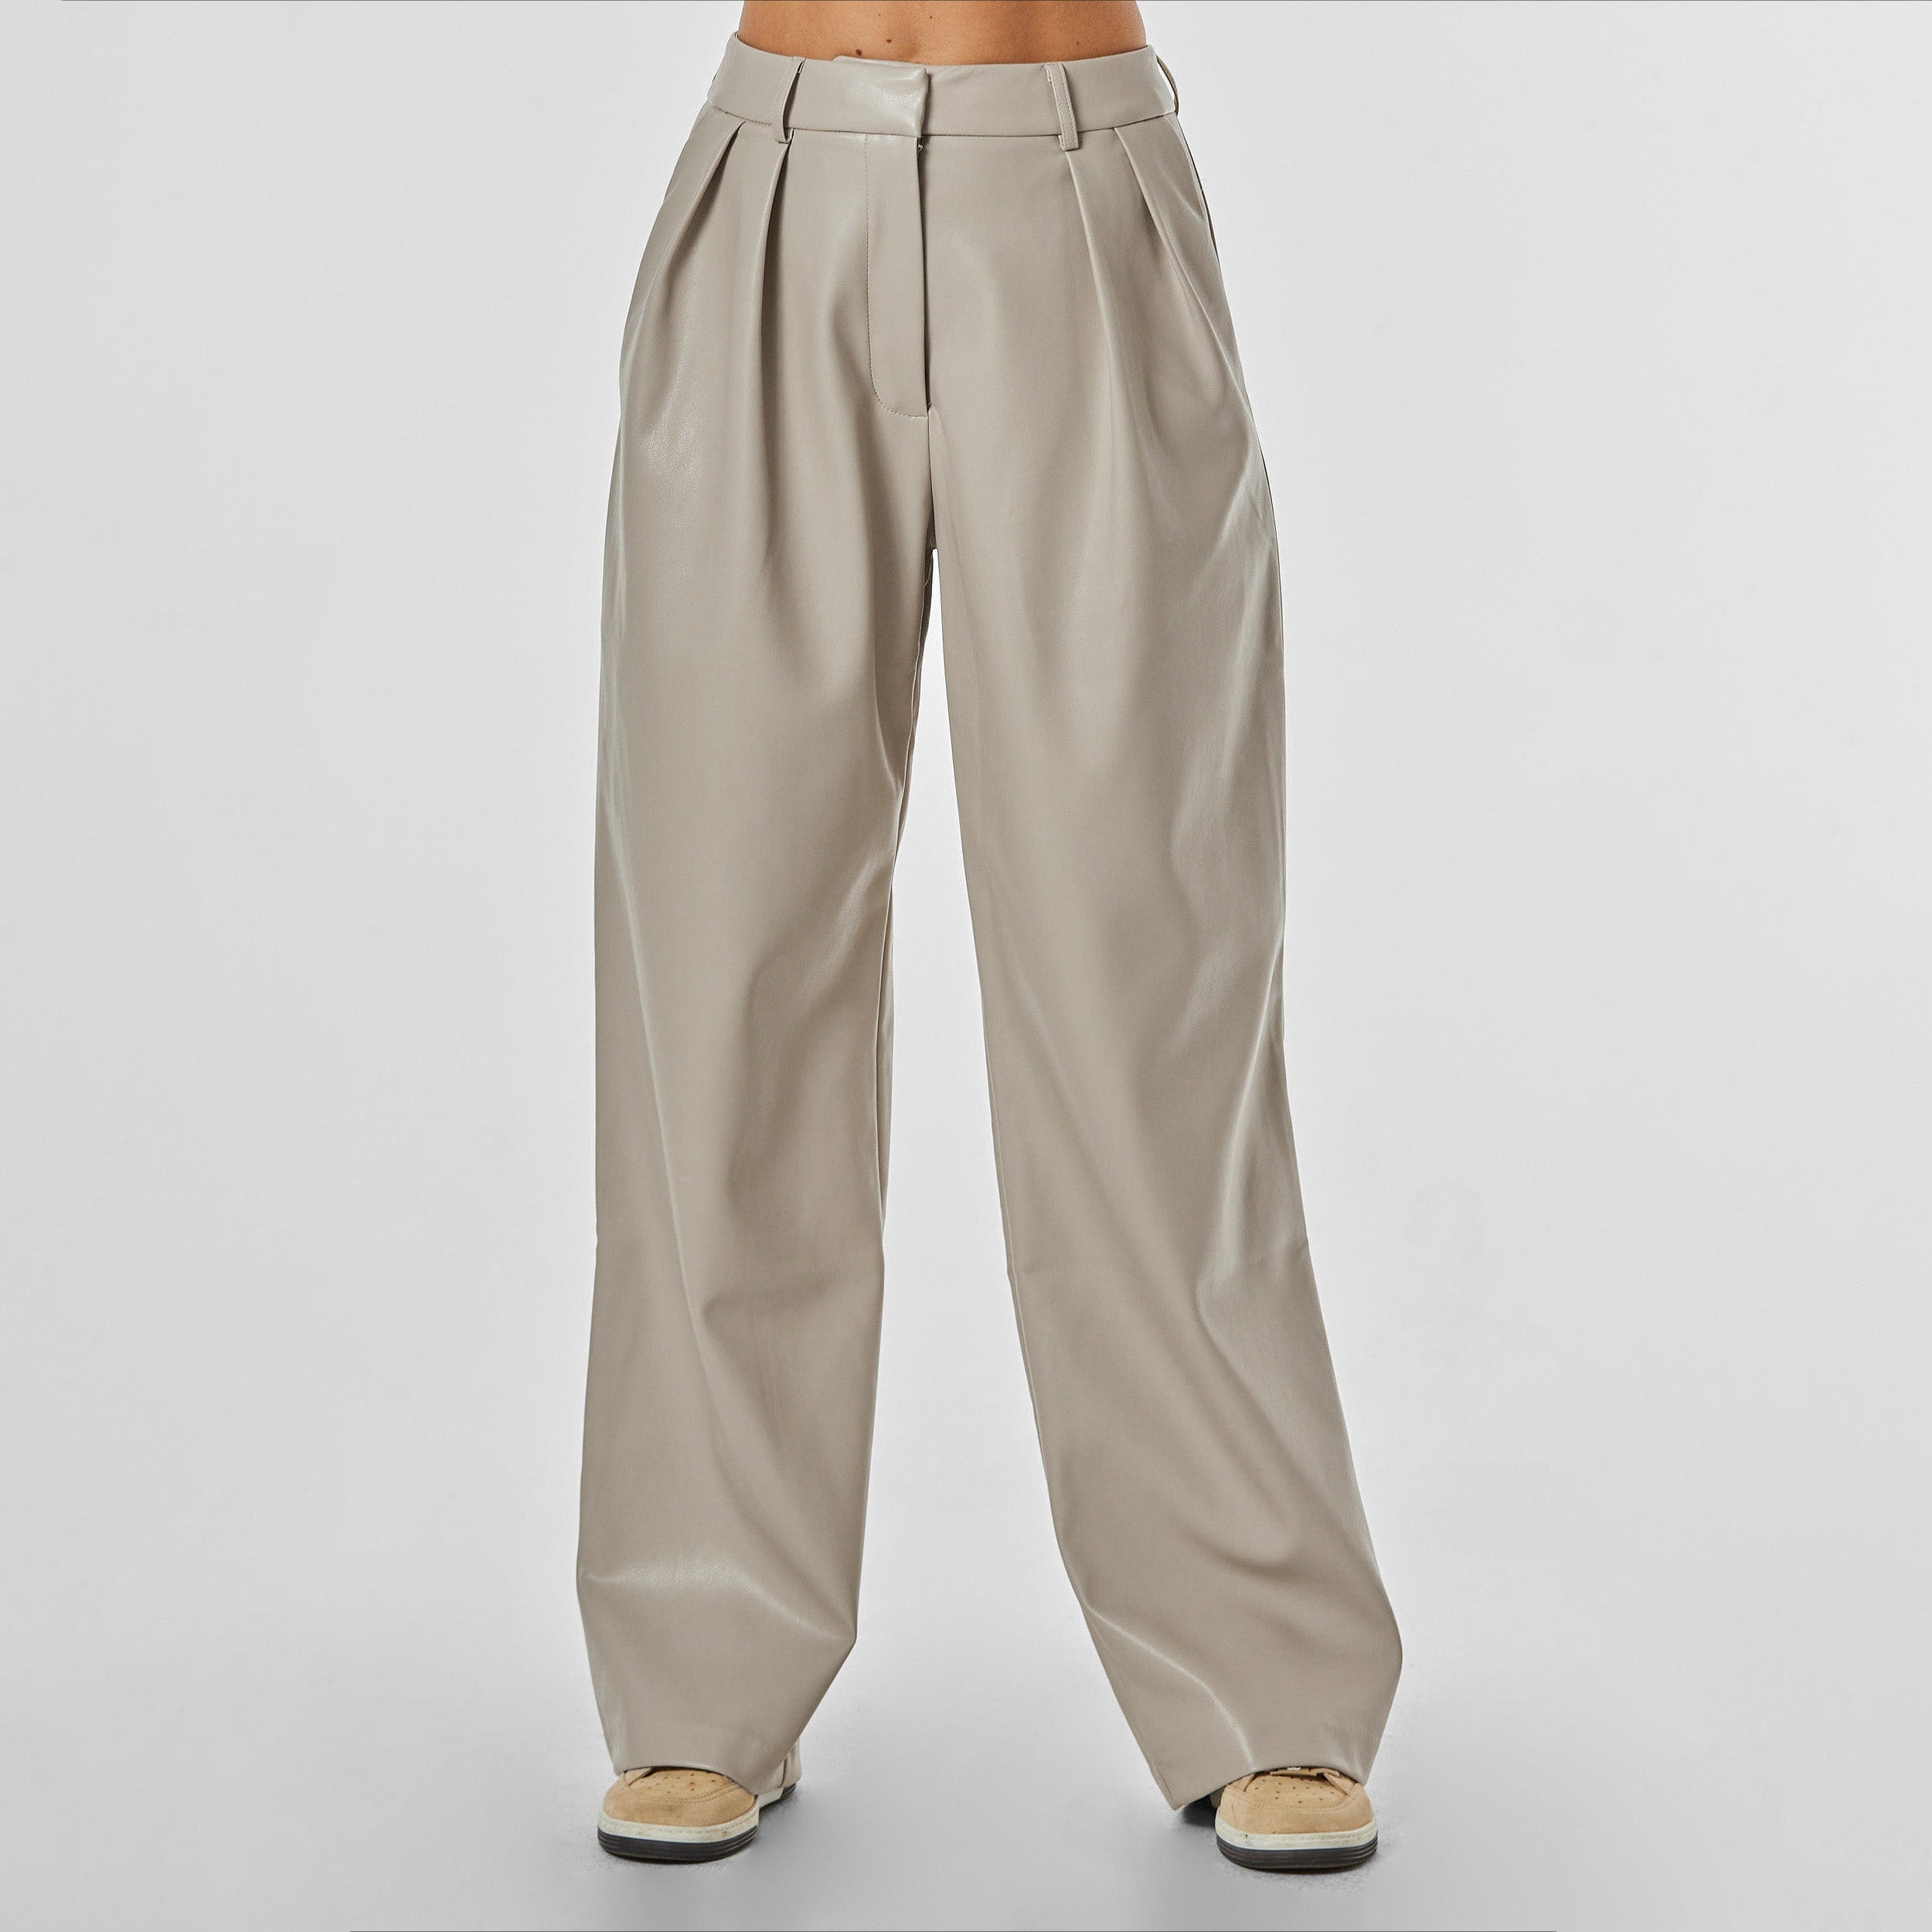 Front view of woman wearing beige colored high rise vegan leather pleated trousers.